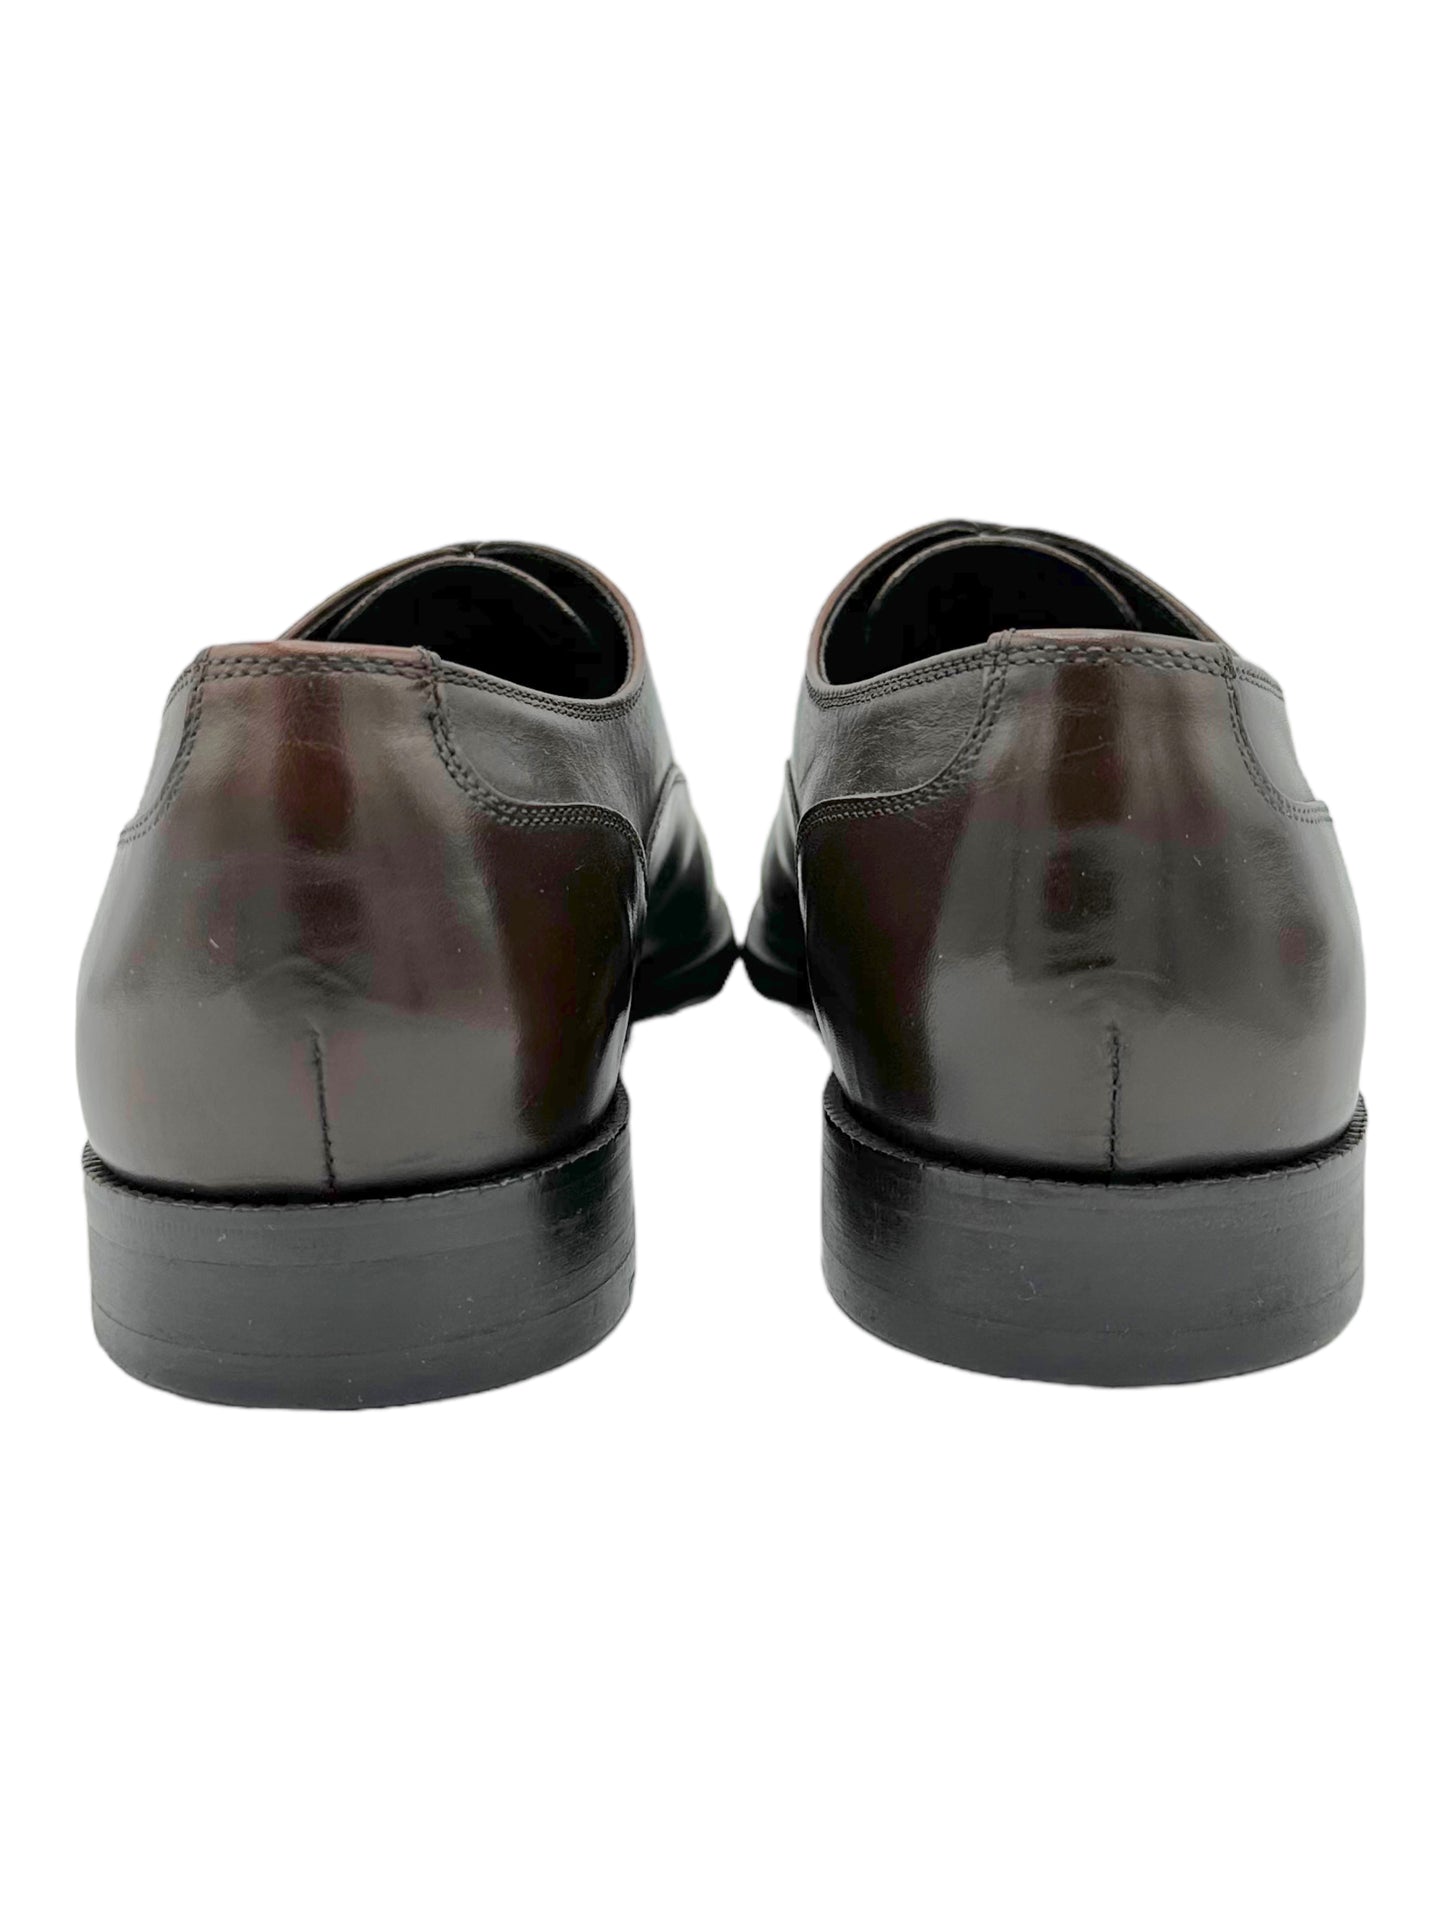 Canali Dark Brown Leather Oxford Dress Shoes - Genuine Design Luxury Consignment for Men. New & Pre-Owned Clothing, Shoes, & Accessories. Calgary, Canada